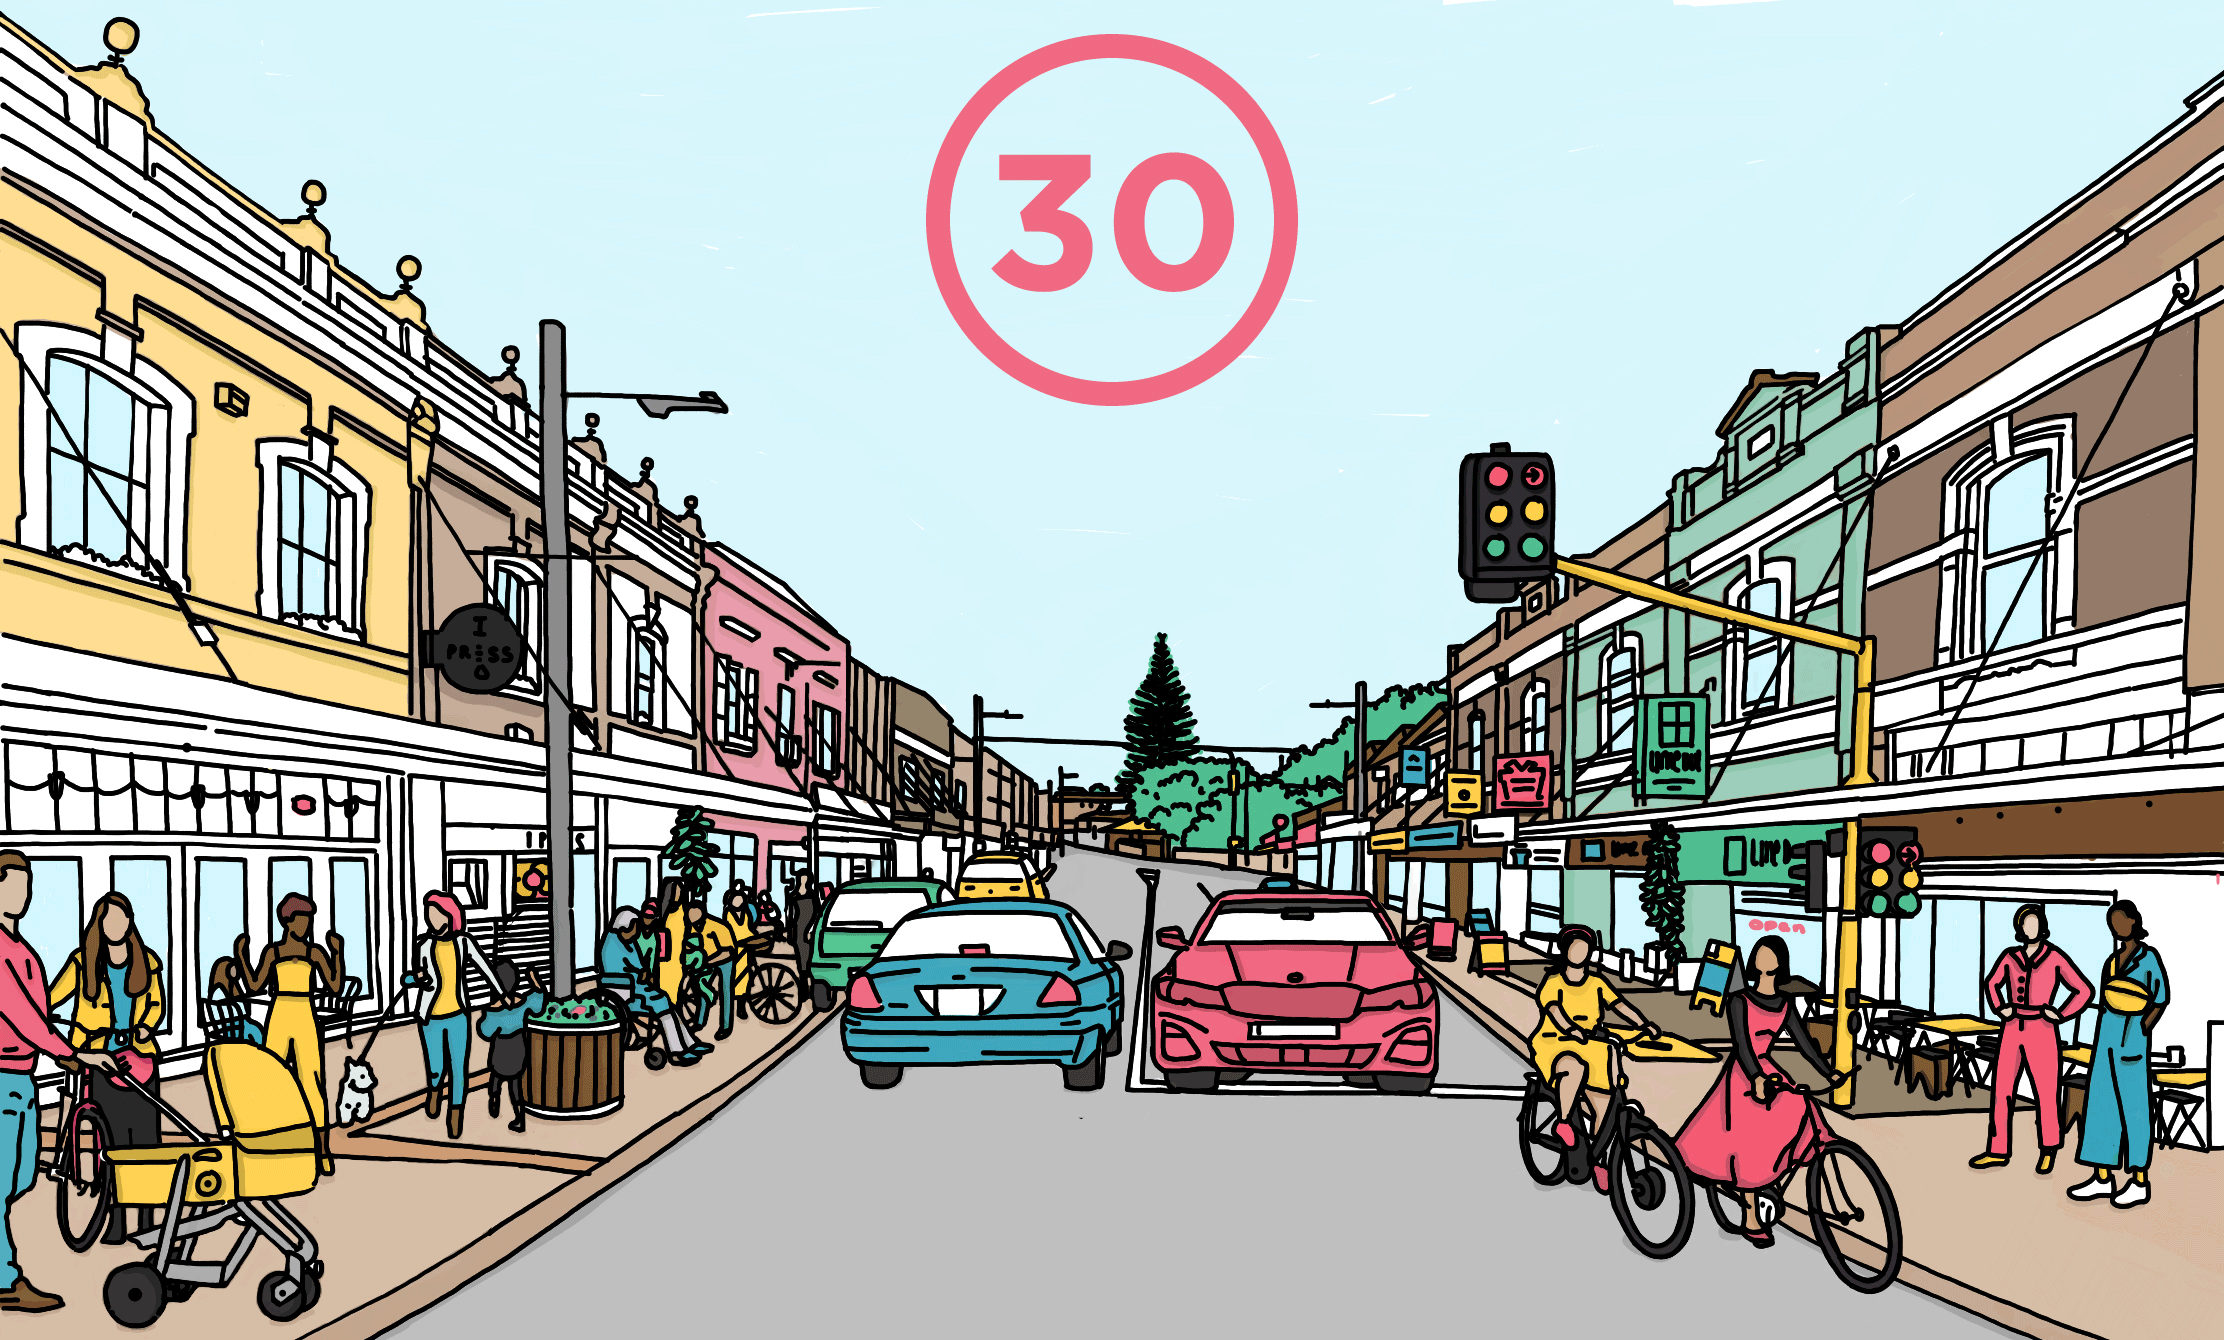 An illustration of a town centre busy with people walking, and riding bikes. There are a couple of cars. There is a 30km/hr speed sign at the top of the image.